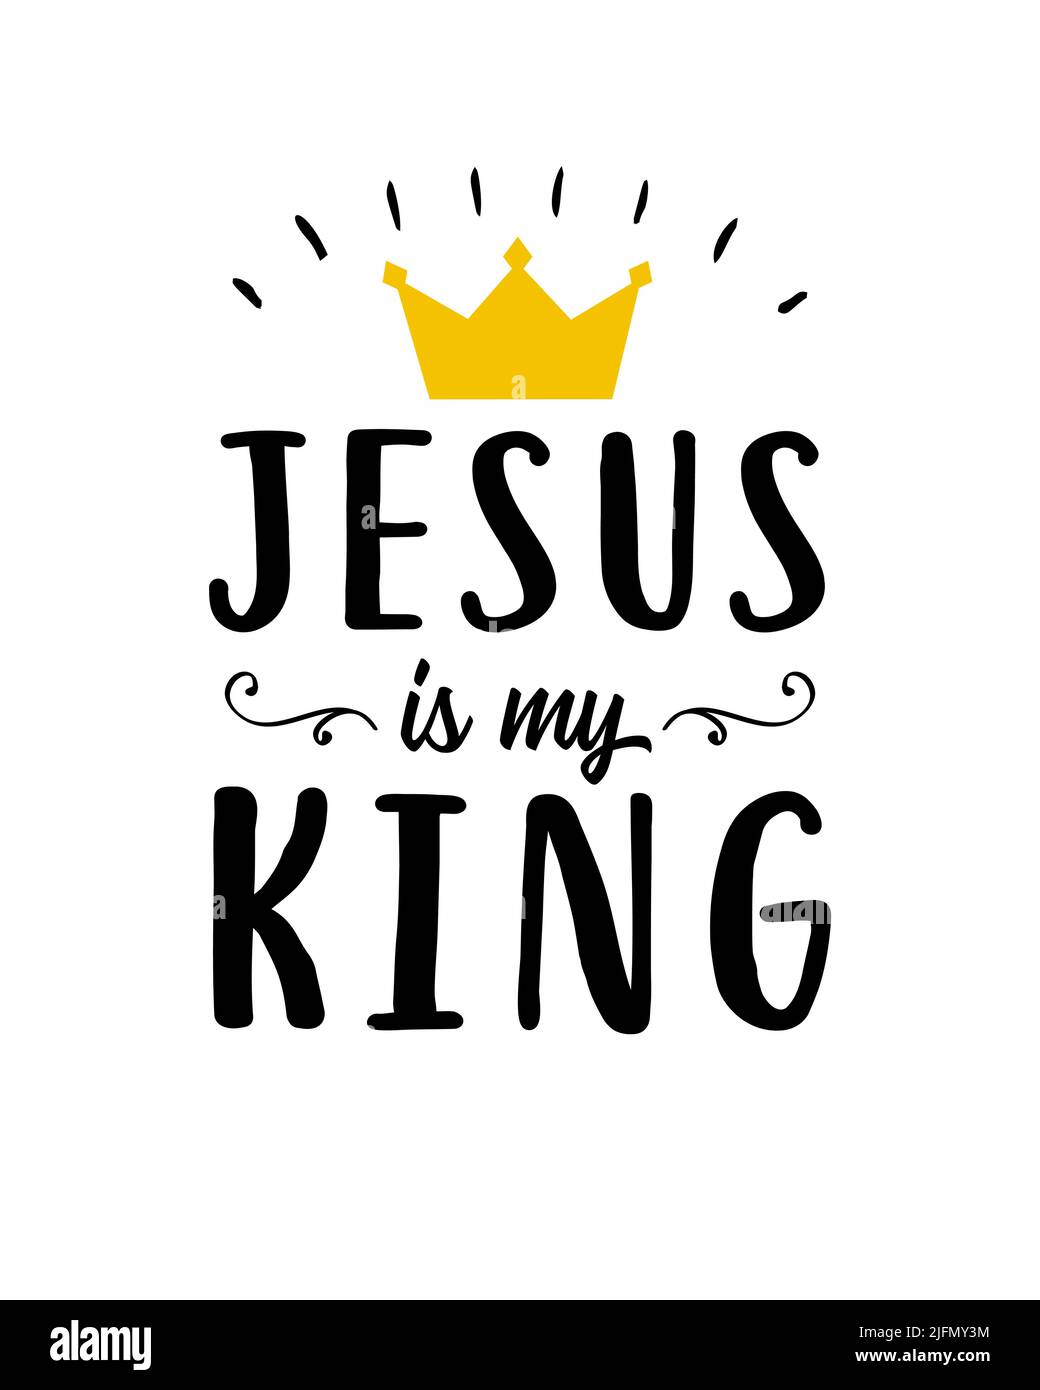 Jesus is my King christian quote. Hand lettering biblical background for t-shirt print, Sunday school or kids ministry. Scripture vector illustration Stock Vector